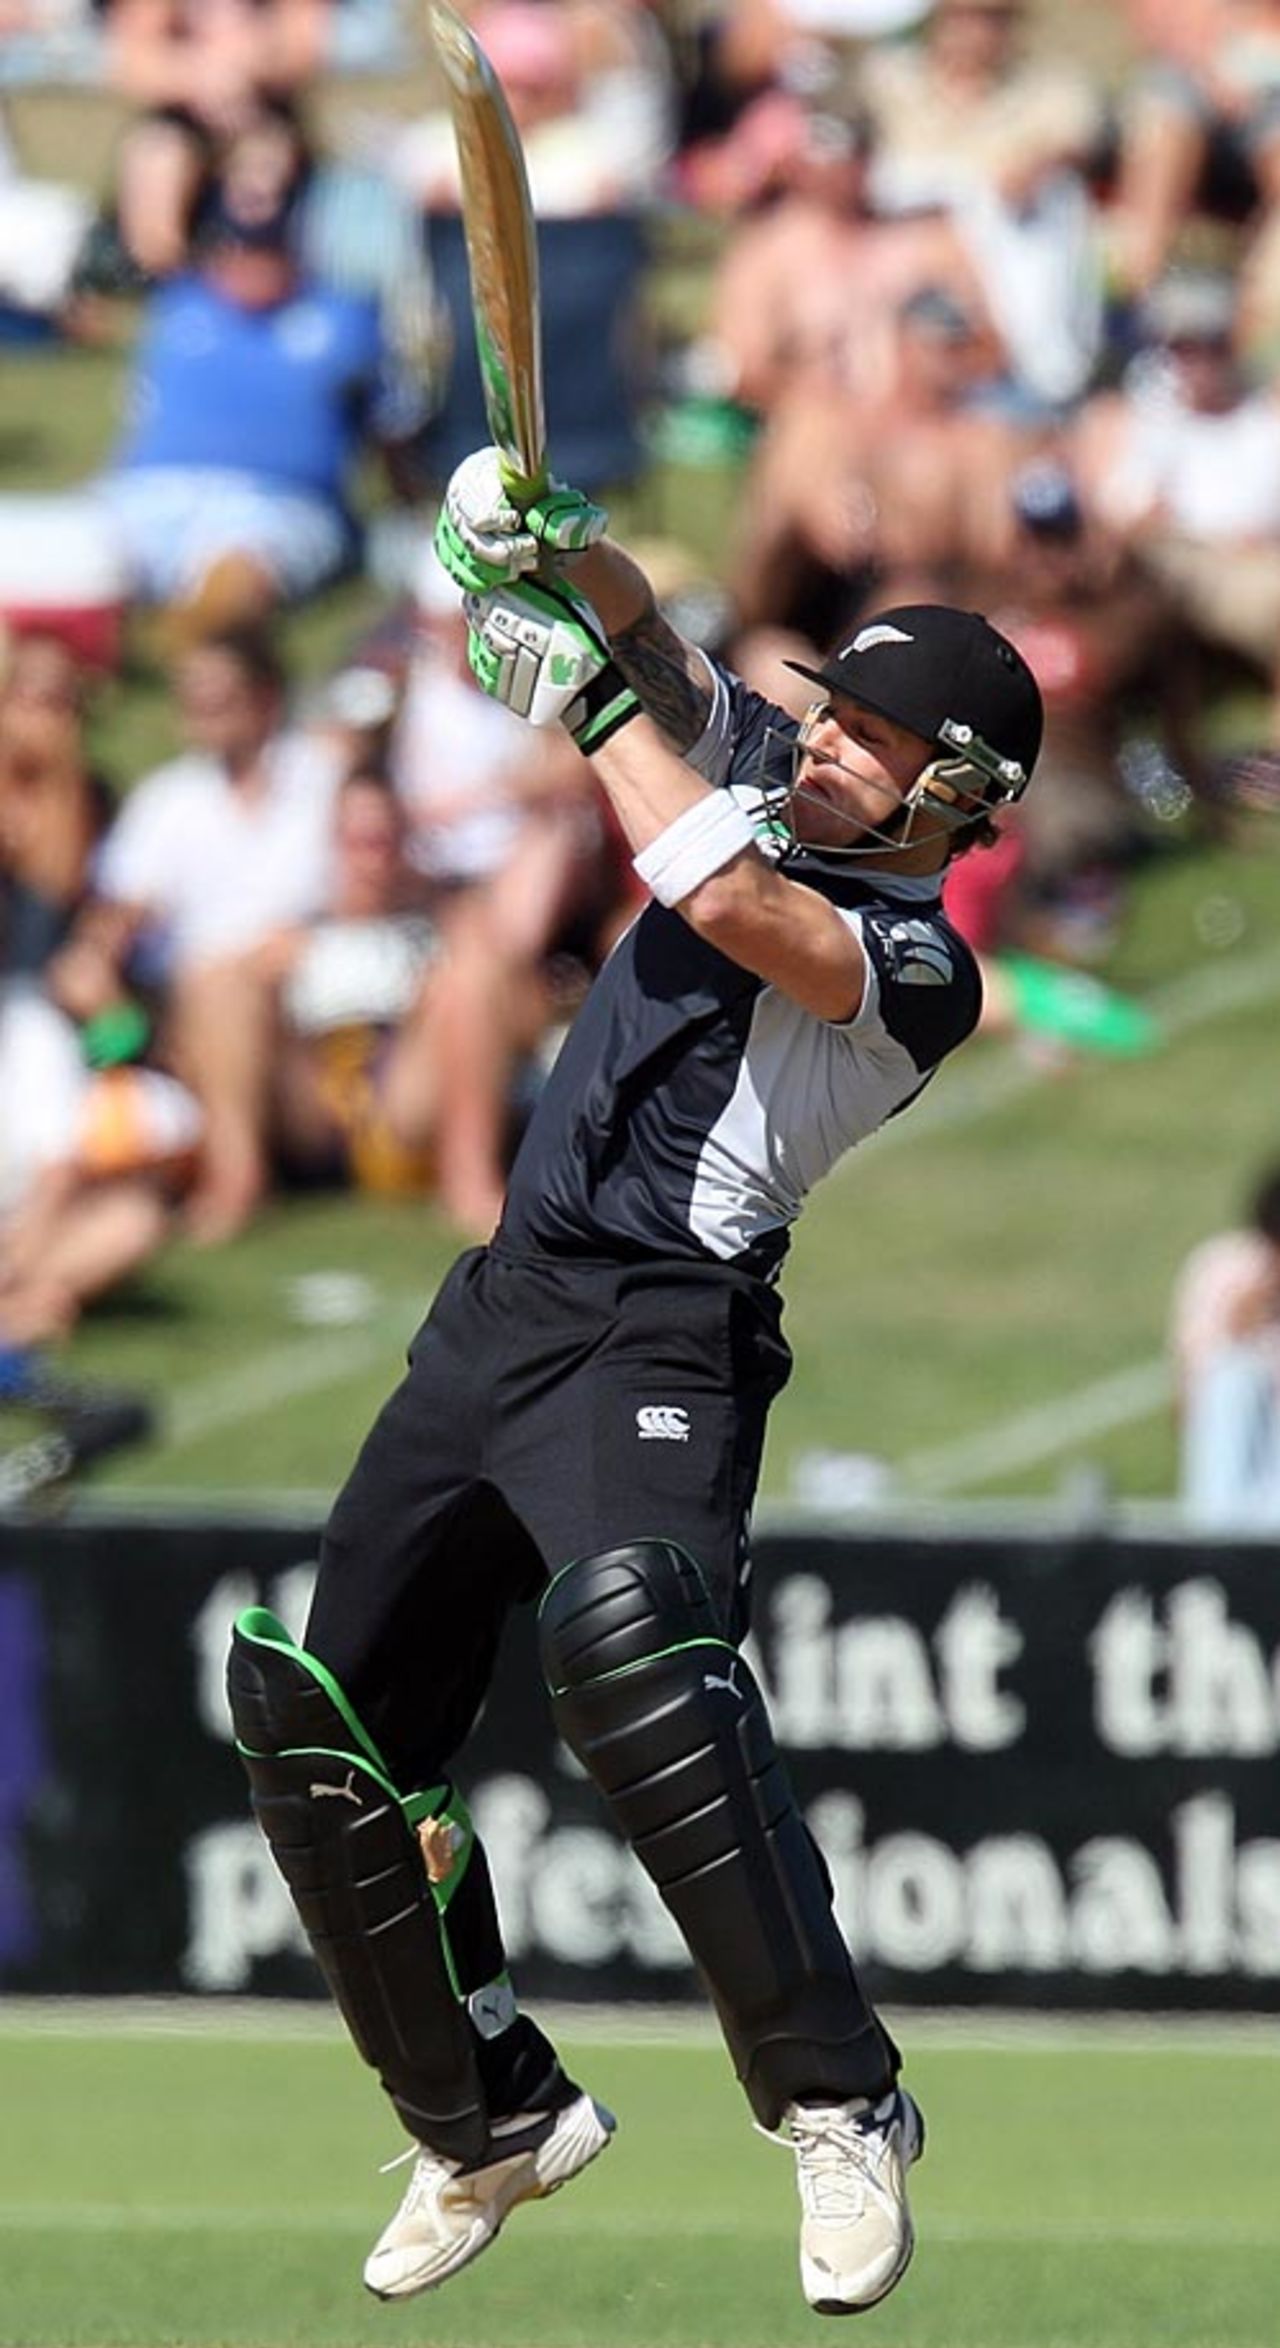 Brendon McCullum gets off the ground while playing a short delivery, New Zealand v West Indies, 5th ODI, Napier, January 13, 2009